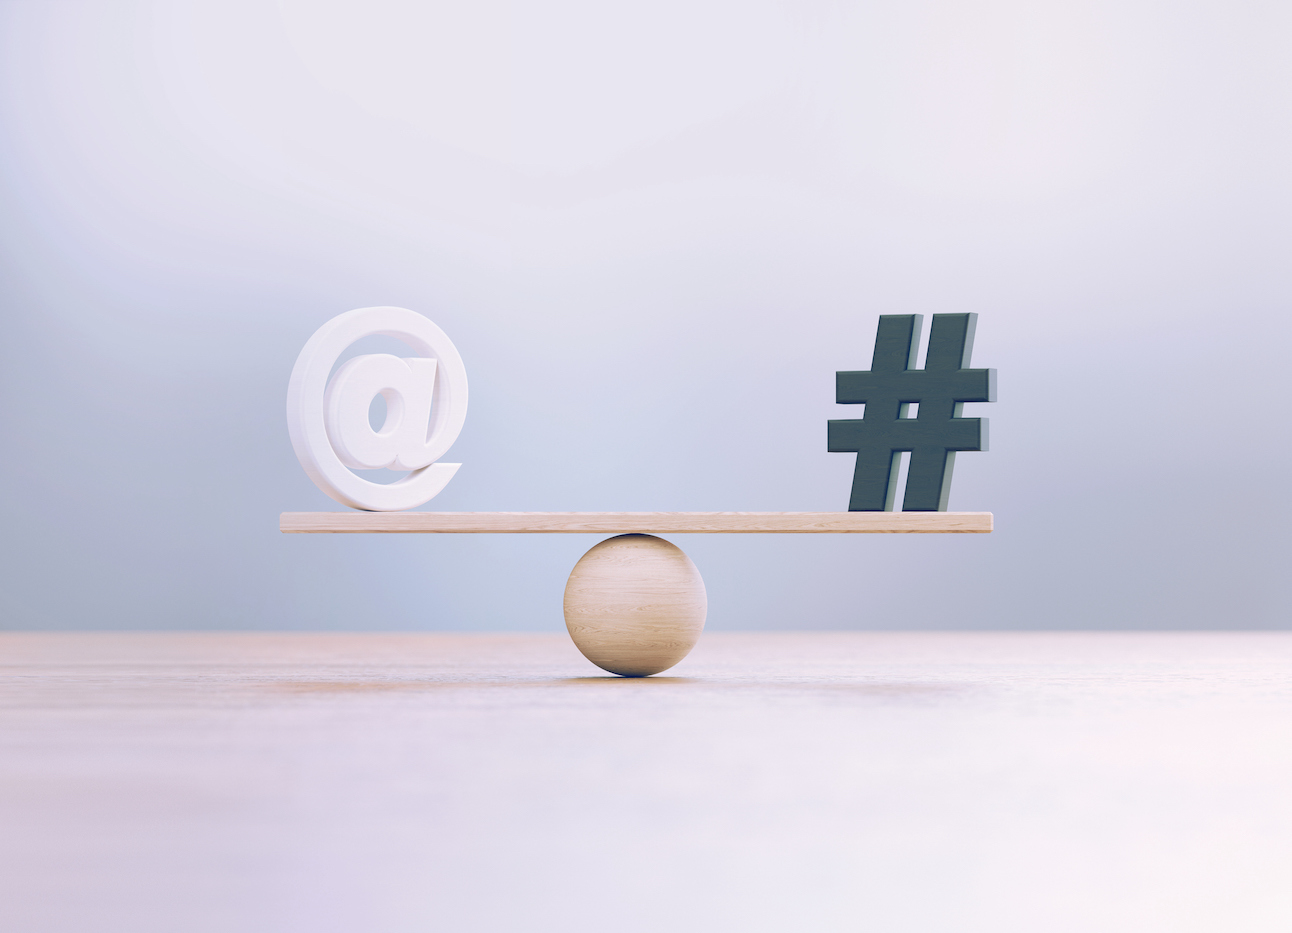 White at and black hashtag symbols sitting over wooden seesaw scale before defocused background.